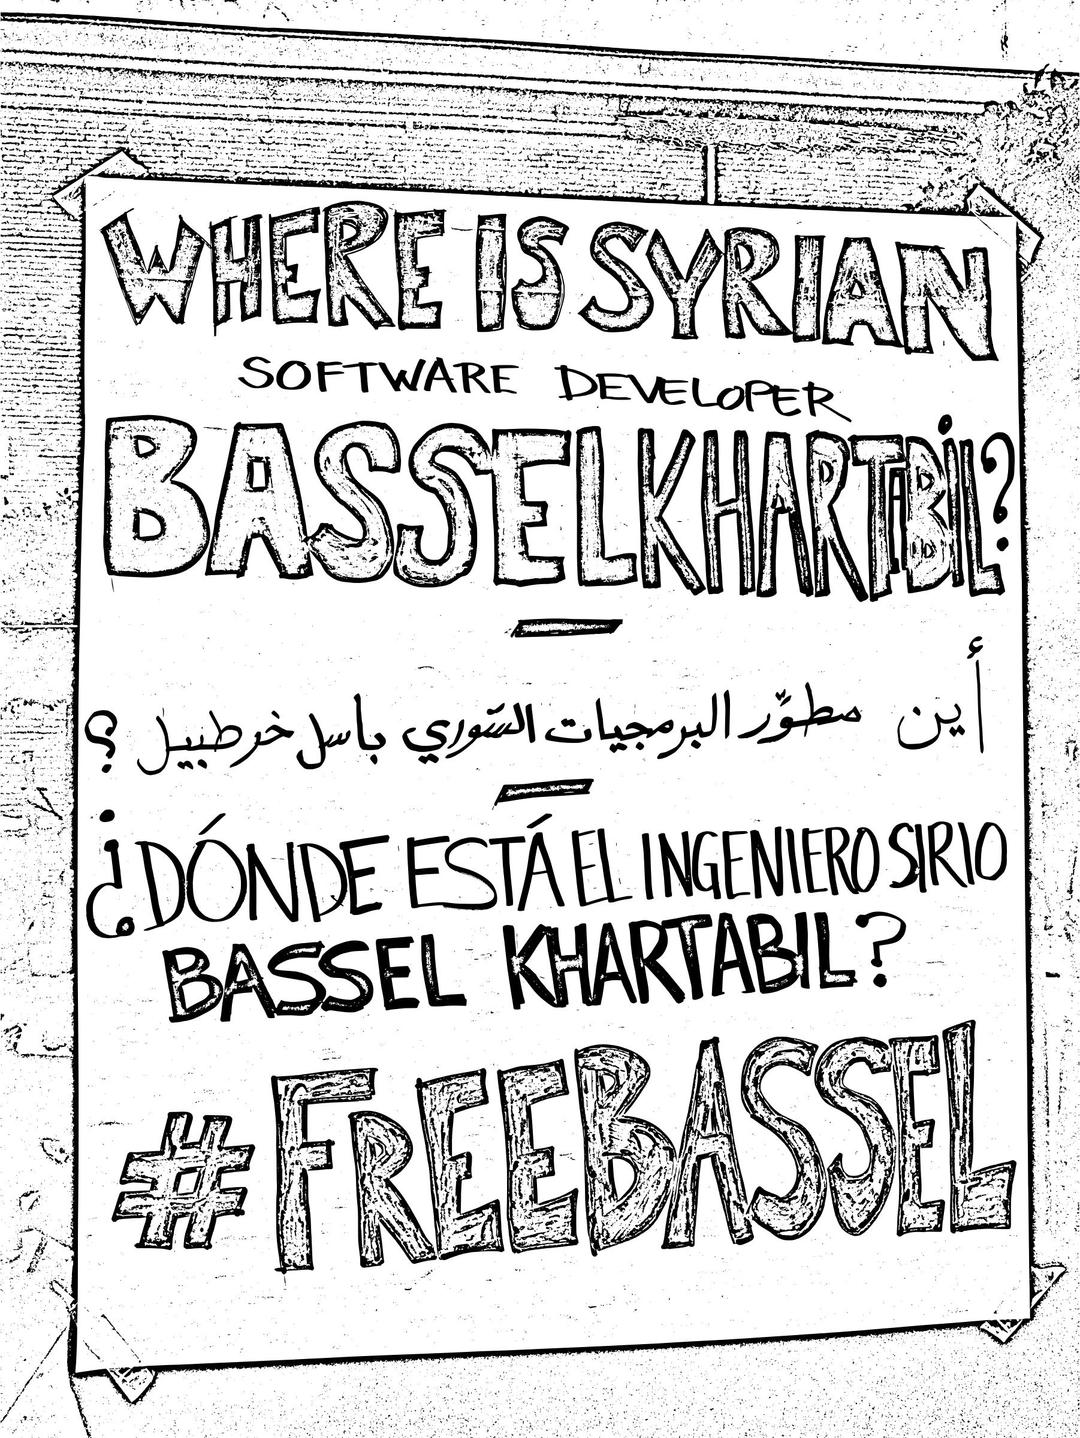 Poster for bassel at internet freedom festival in Valencia Spain. March 4. png transparent